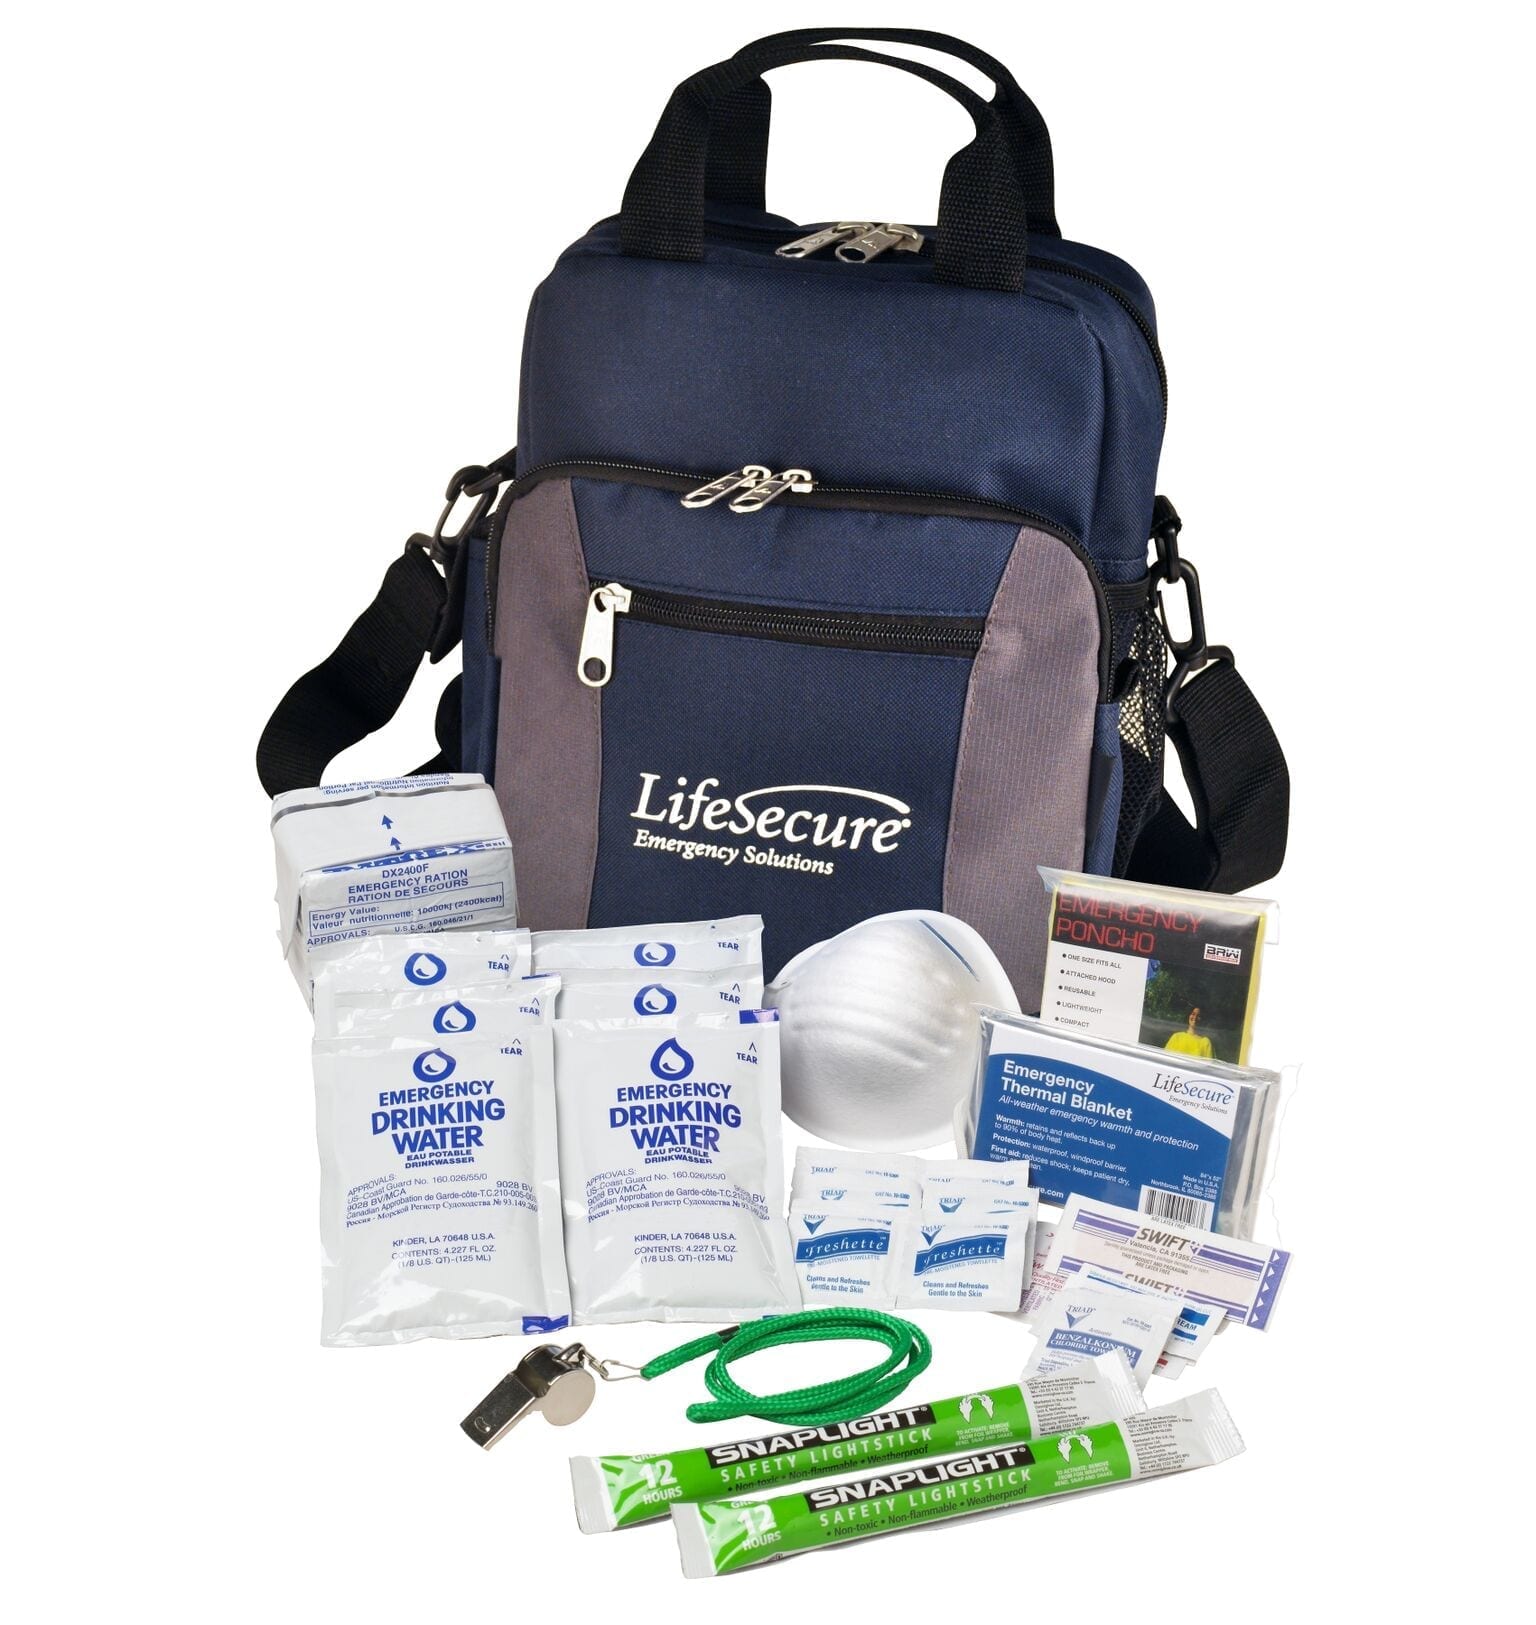 LifeSecure Compact 3-DAY Emergency Survival Kit (80001)